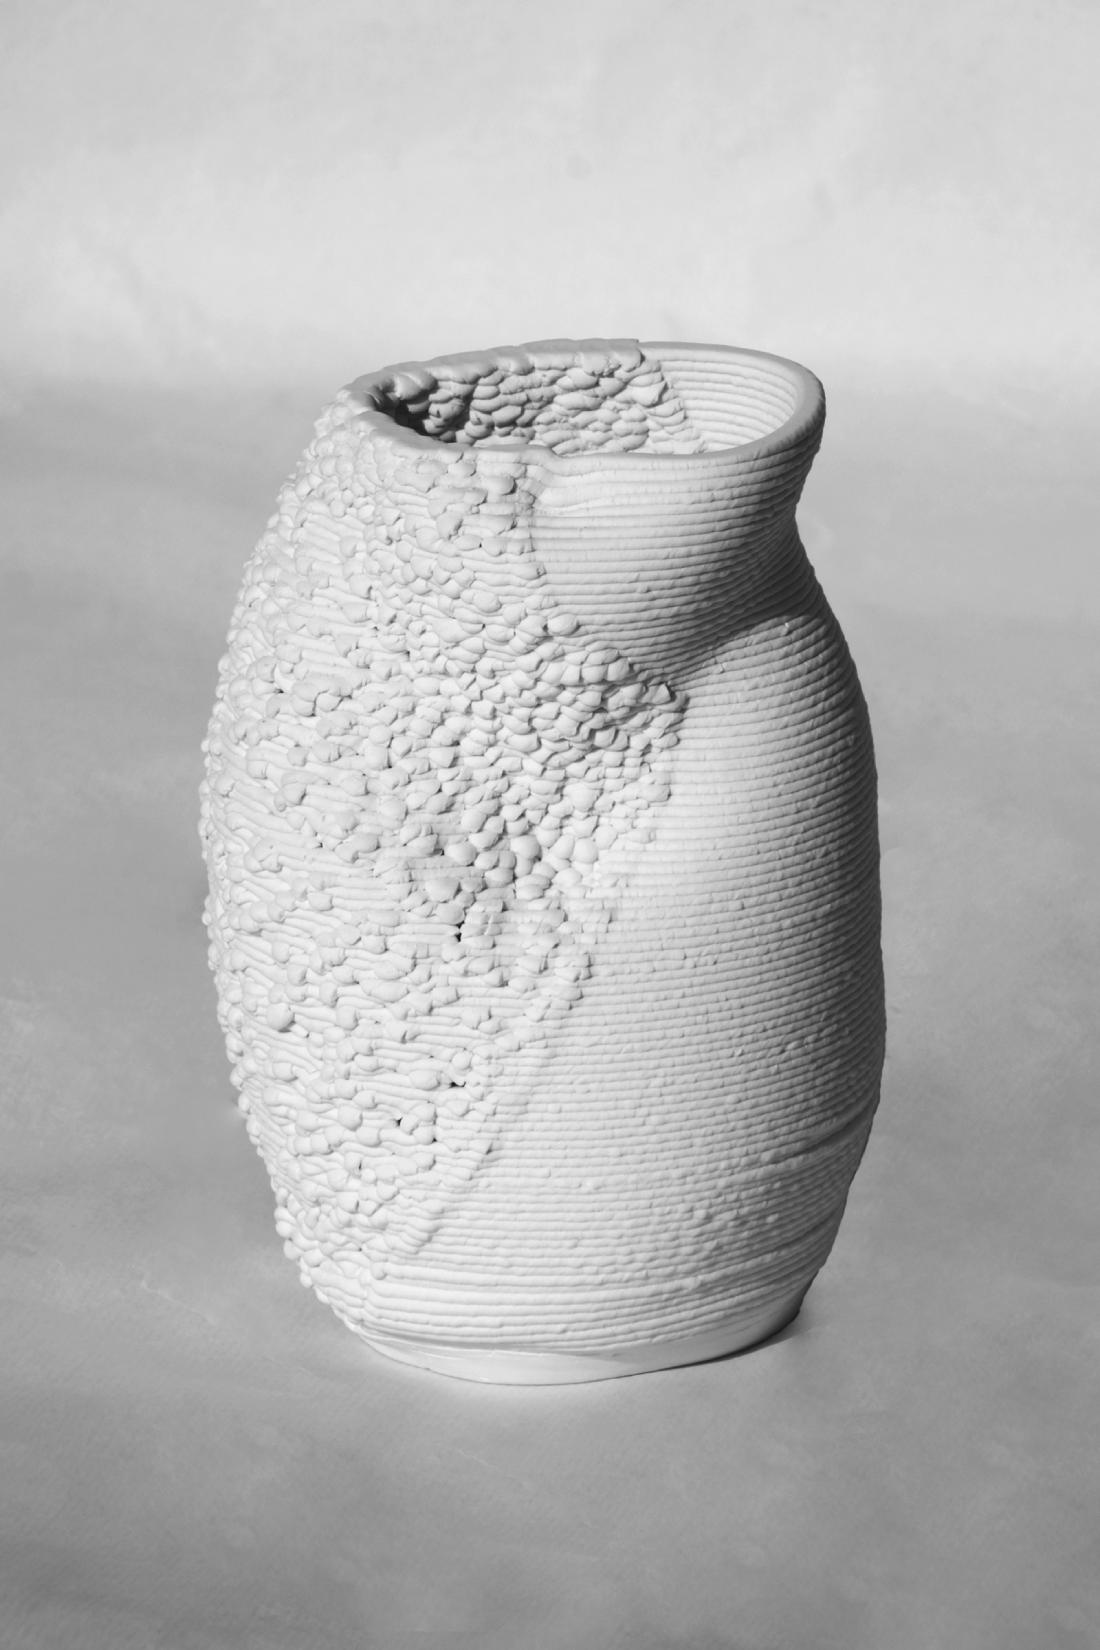 Second piece, made of printed porcelain. It has a beaker-like shape, with a patch of bumpy texture on the left.